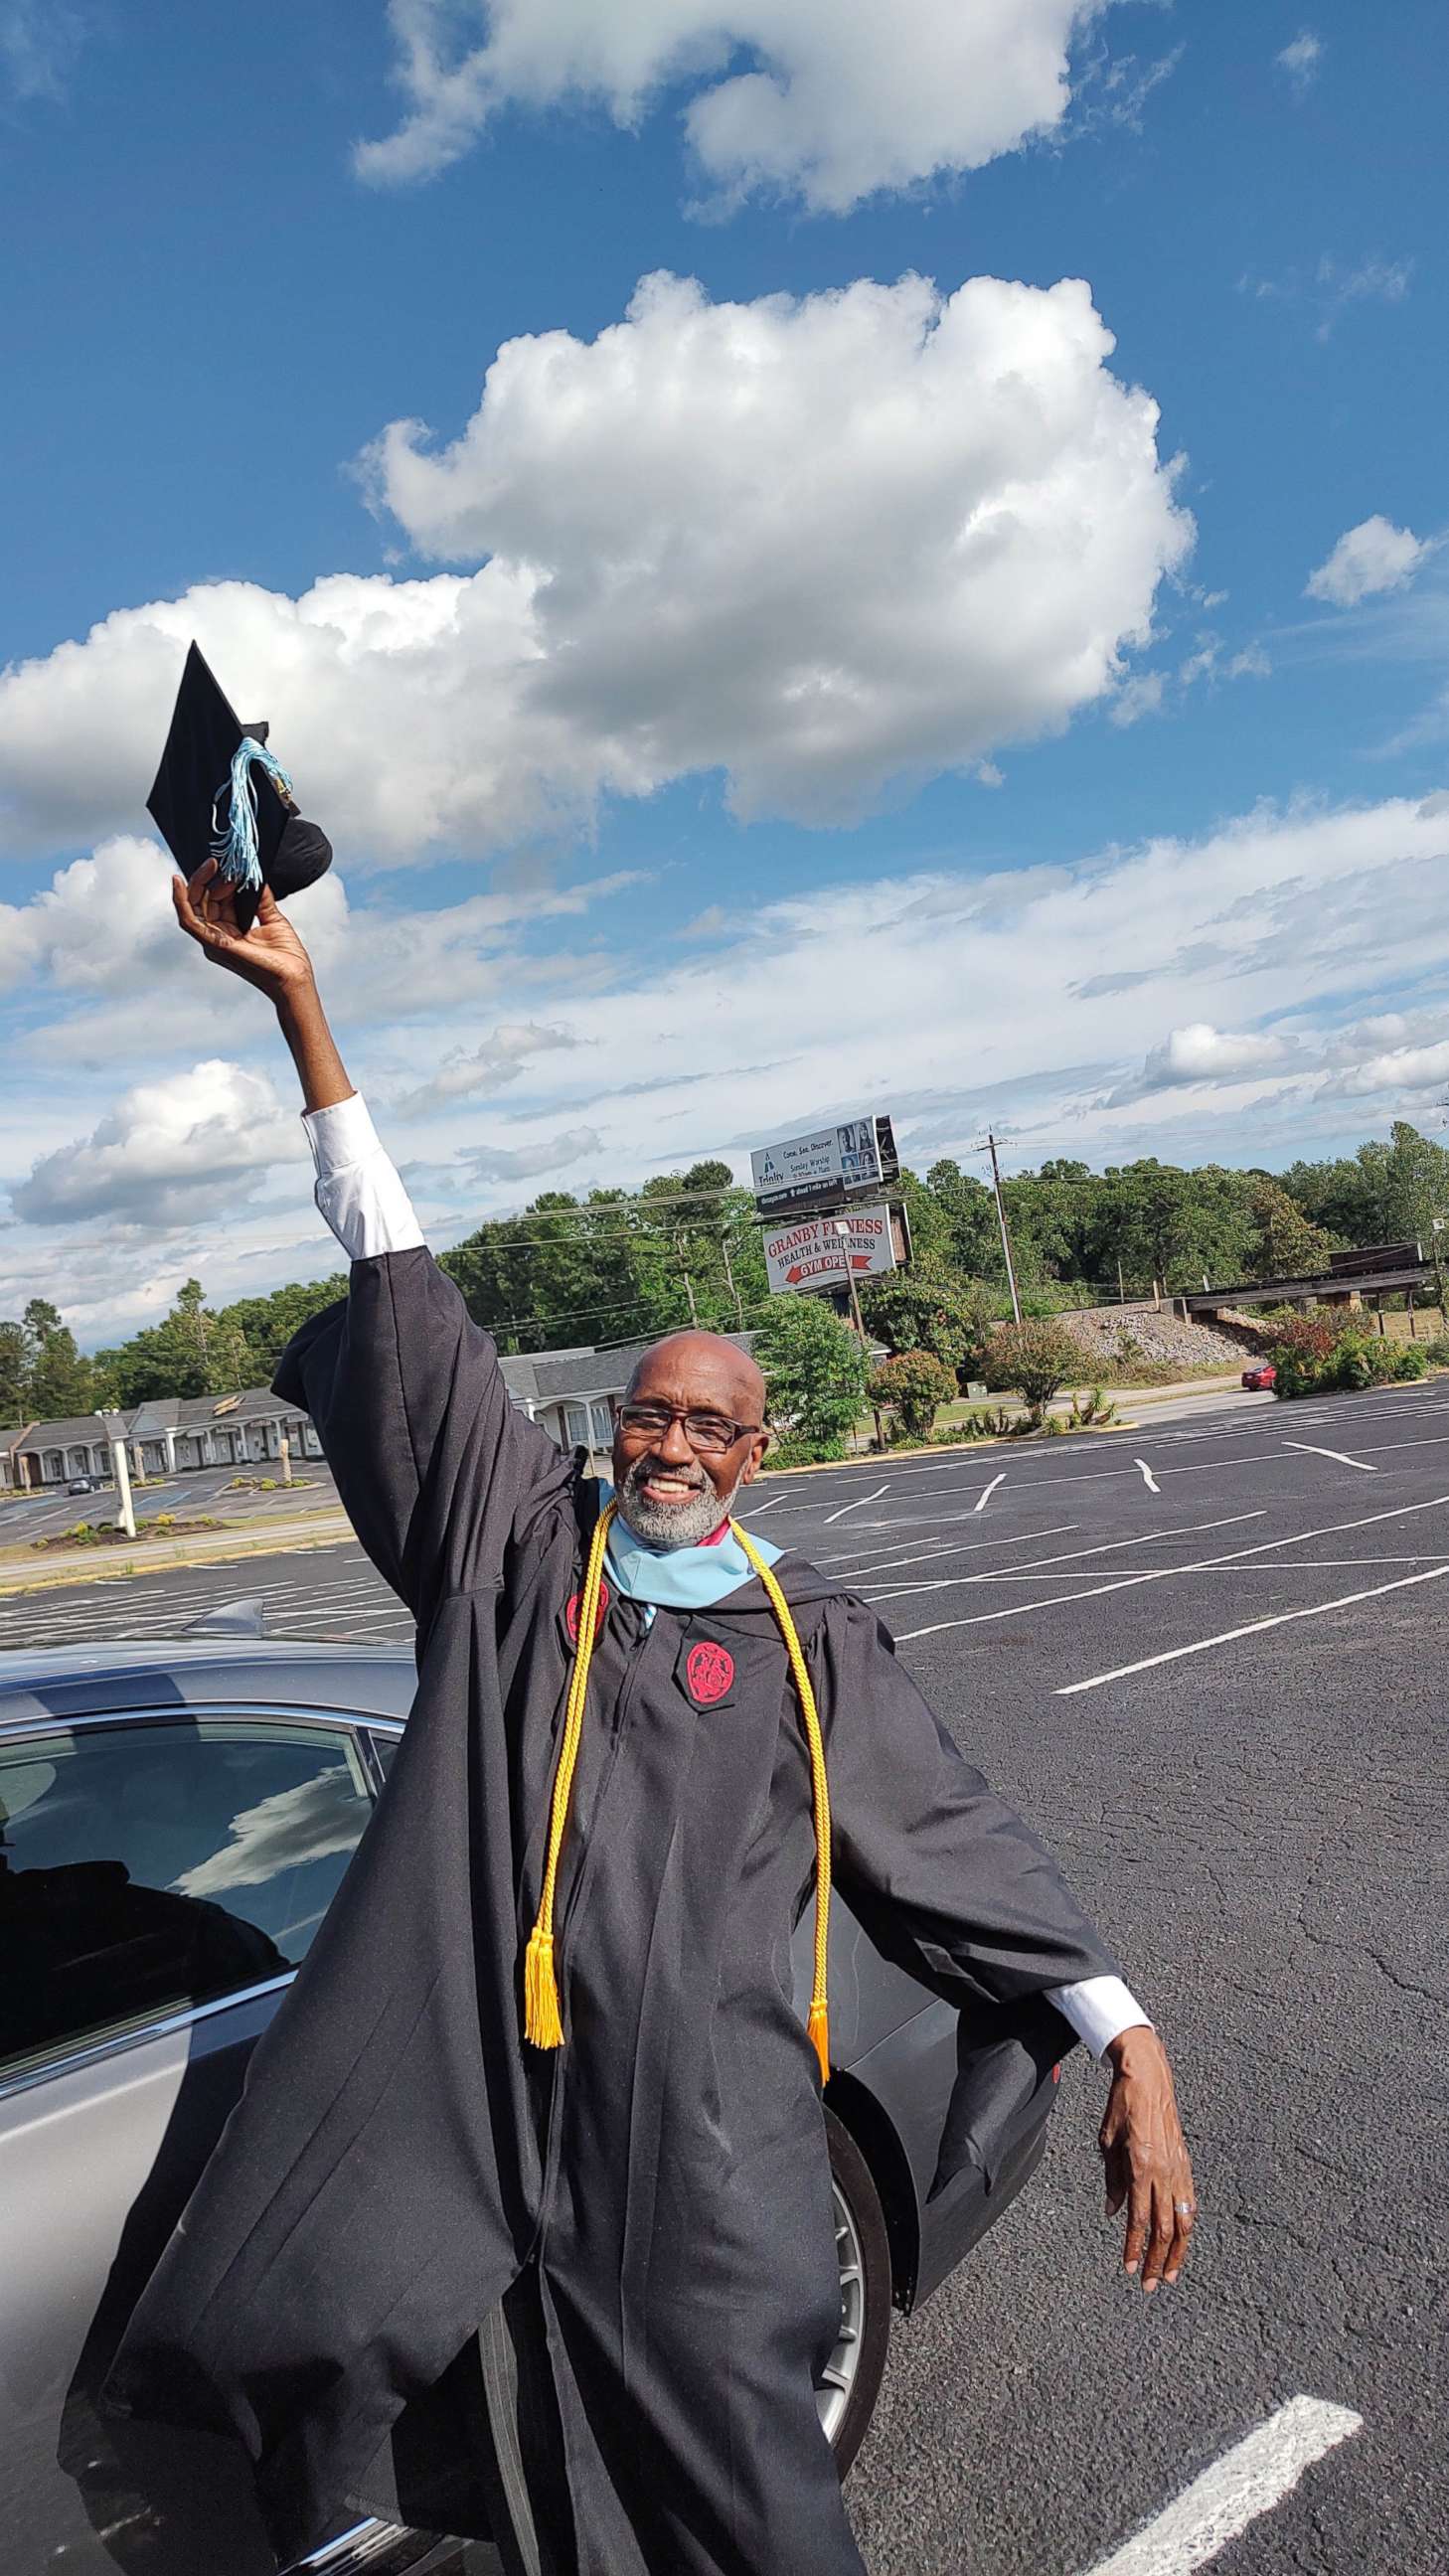 PHOTO: Leroy Harley went back to school at age 69 and now, at 71, has graduated with a master's degree in teaching from the University of South Carolina.